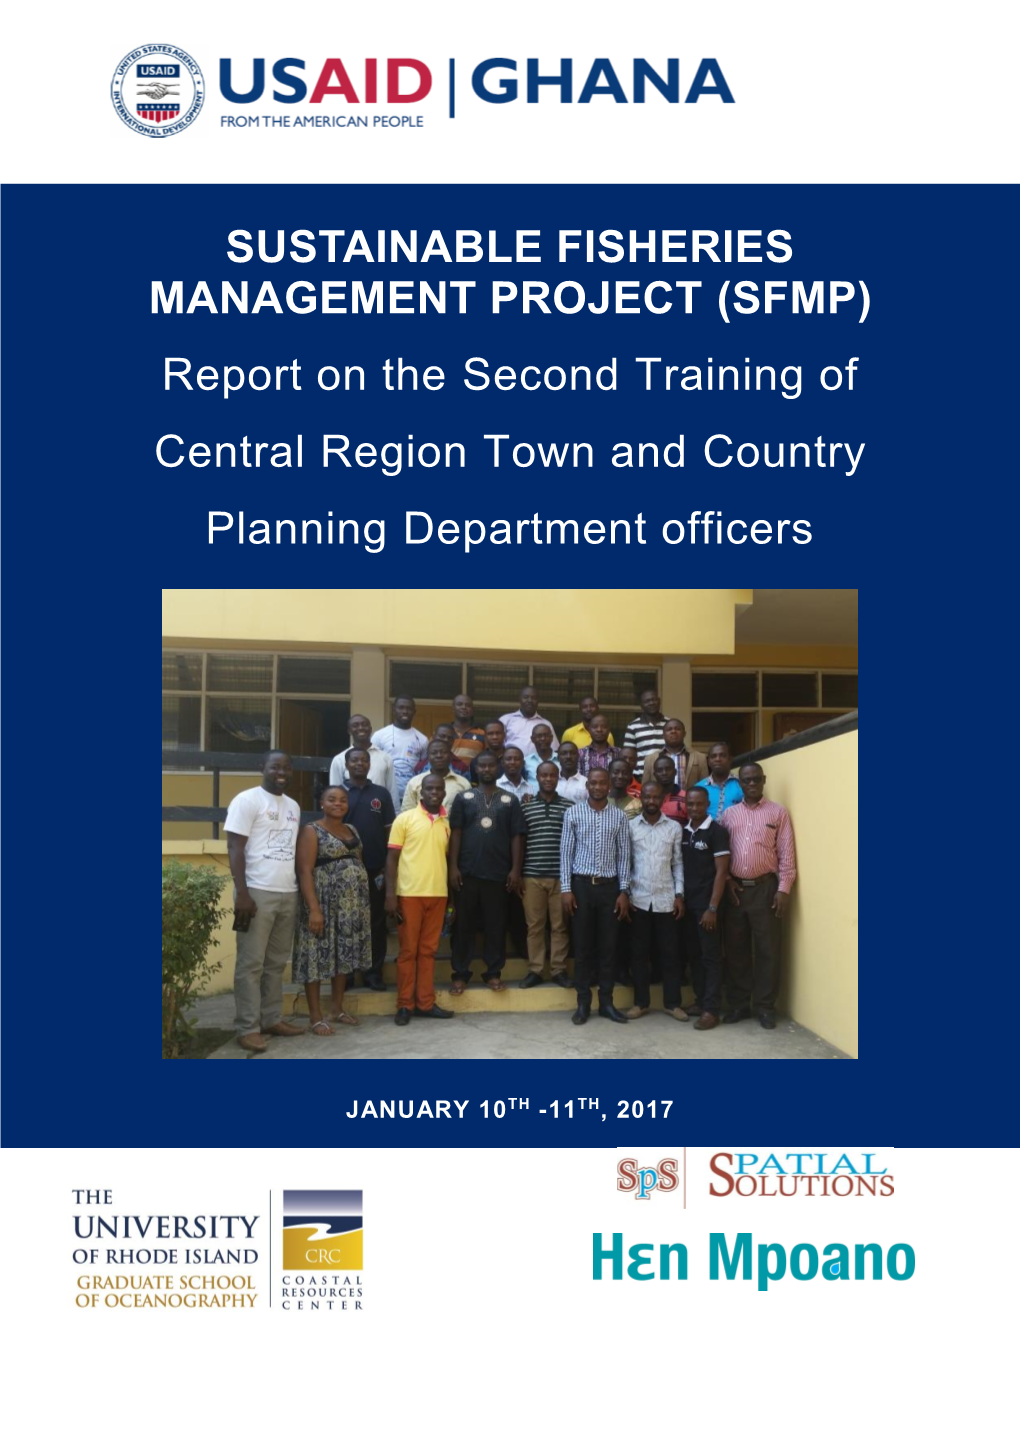 (SFMP) Report on the Second Training of Central Region Town and Country Planning Department Officers